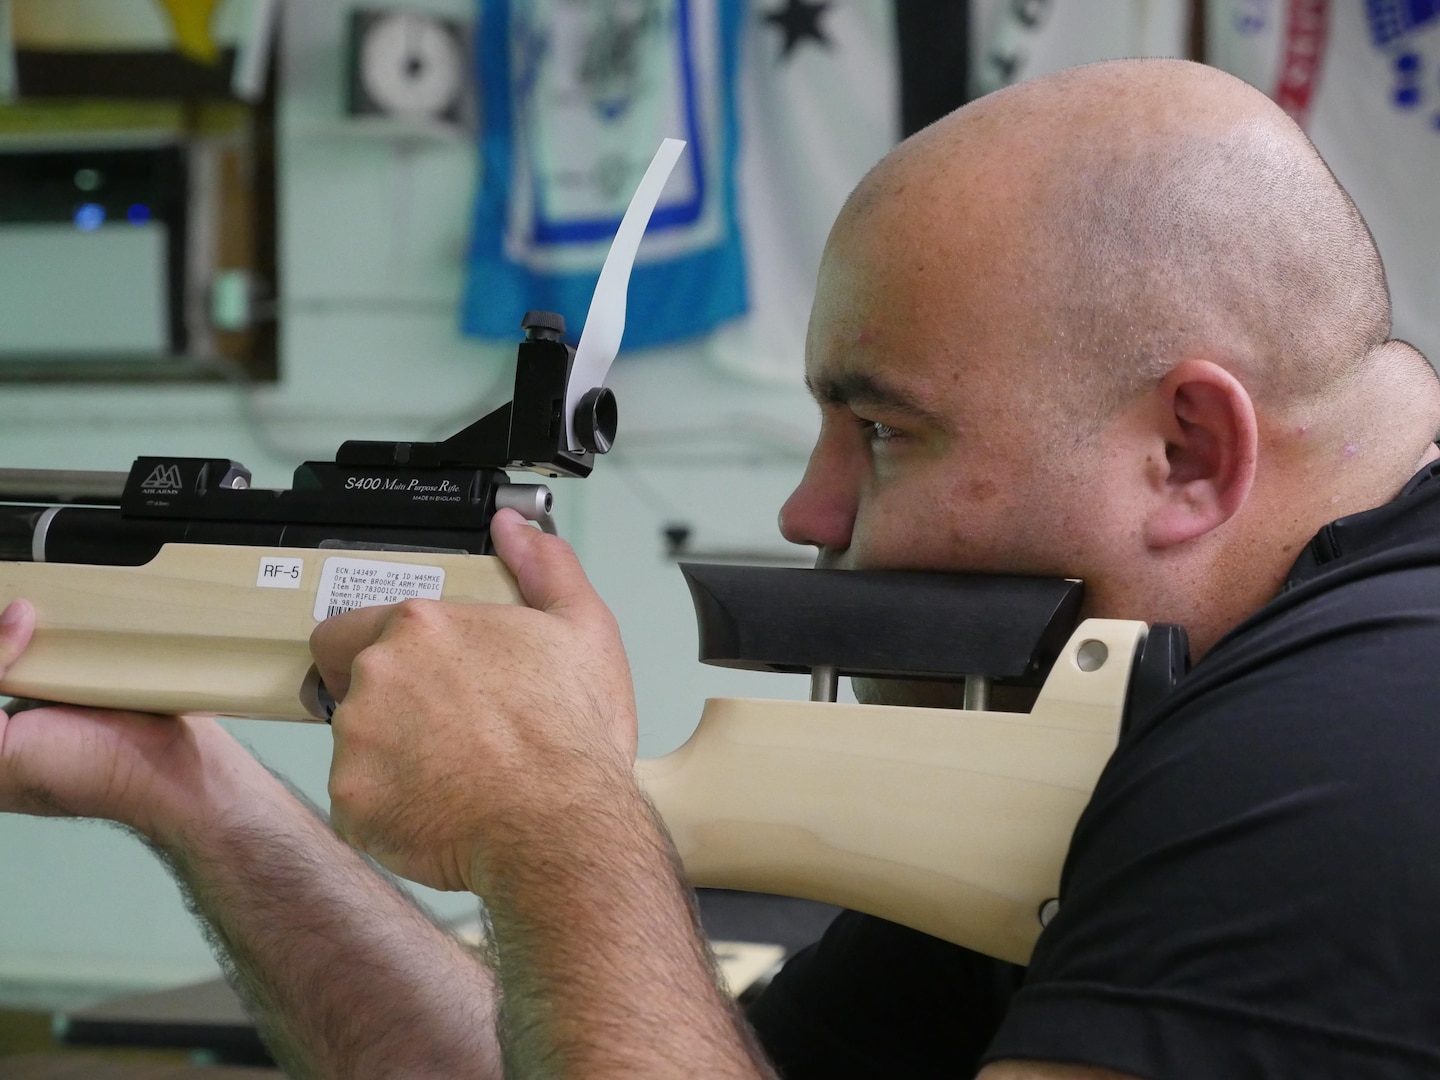 U.S. Army Sgt. David Crook, Bravo Company, Warrior Transition Battalion, Brooke Army Medical Center, is ready to squeeze the trigger during an air rifle training session at Central Catholic High School, San Antonio, Texas, Nov. 10, 2016. The training is part of the WTB’s adaptive reconditioning program.  (U.S. Army photo by Robert A. Whetstone/Released)